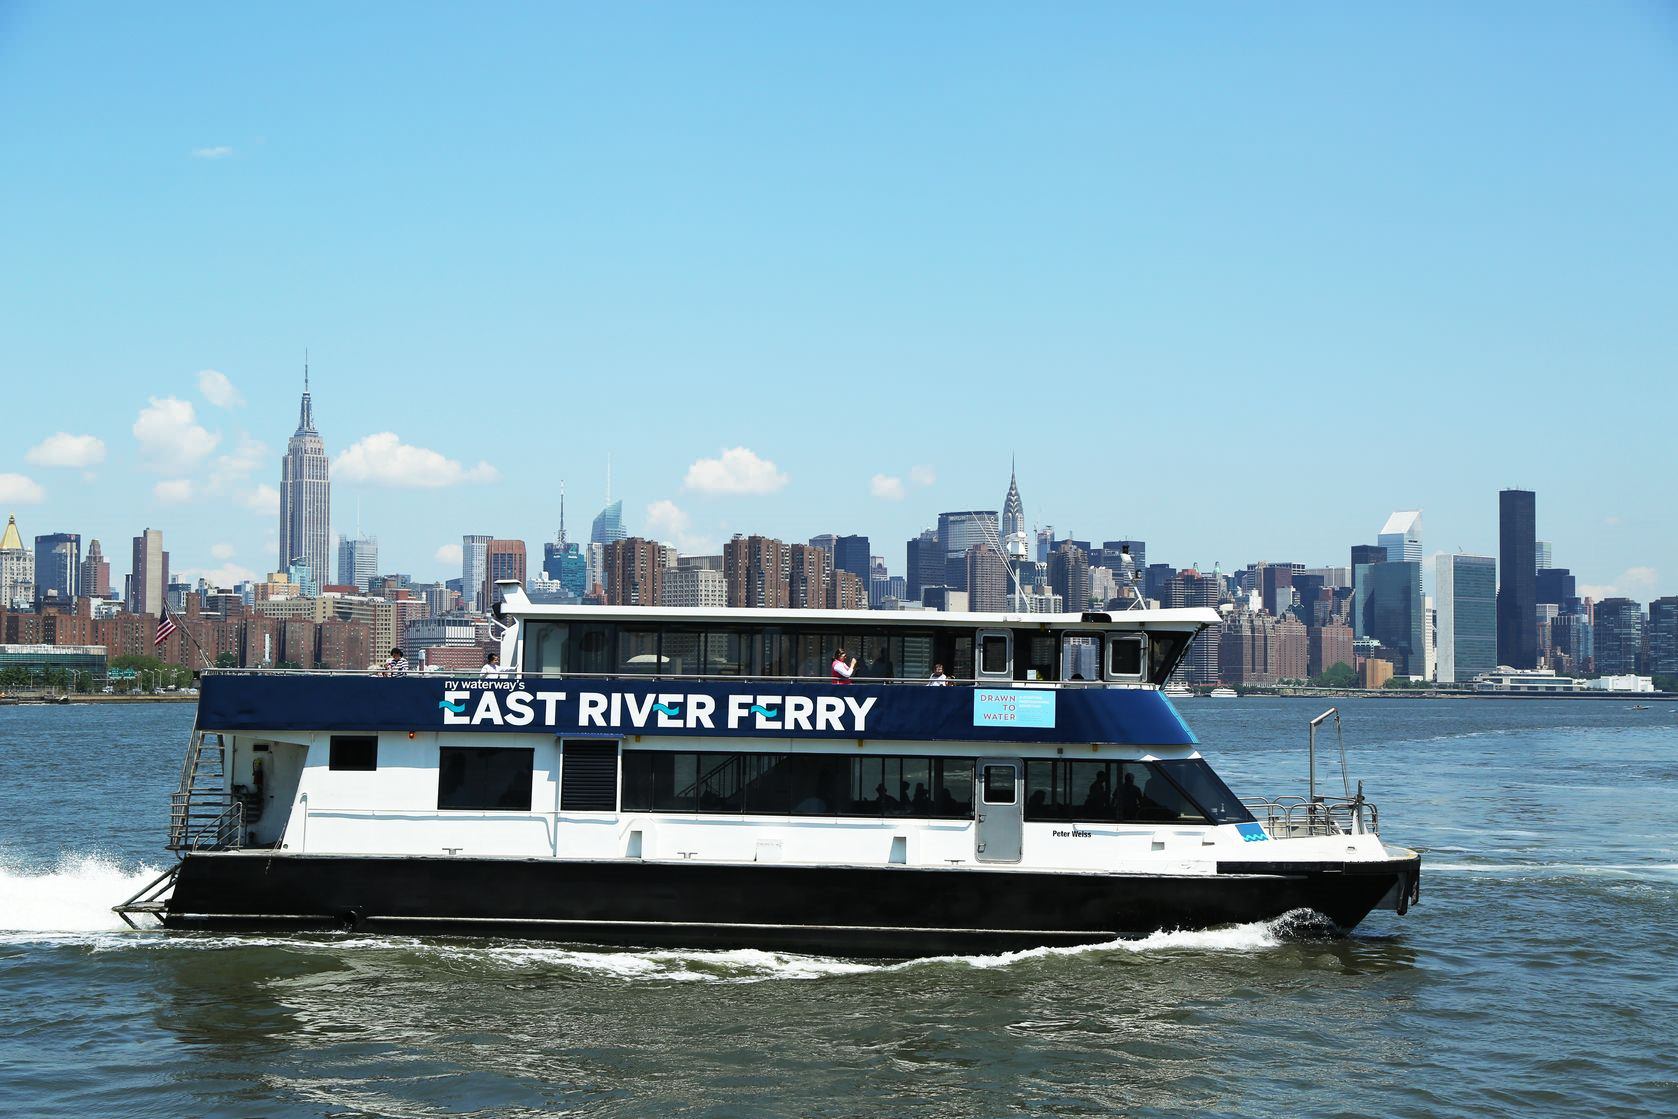 East River Ferry Increased Property Prices